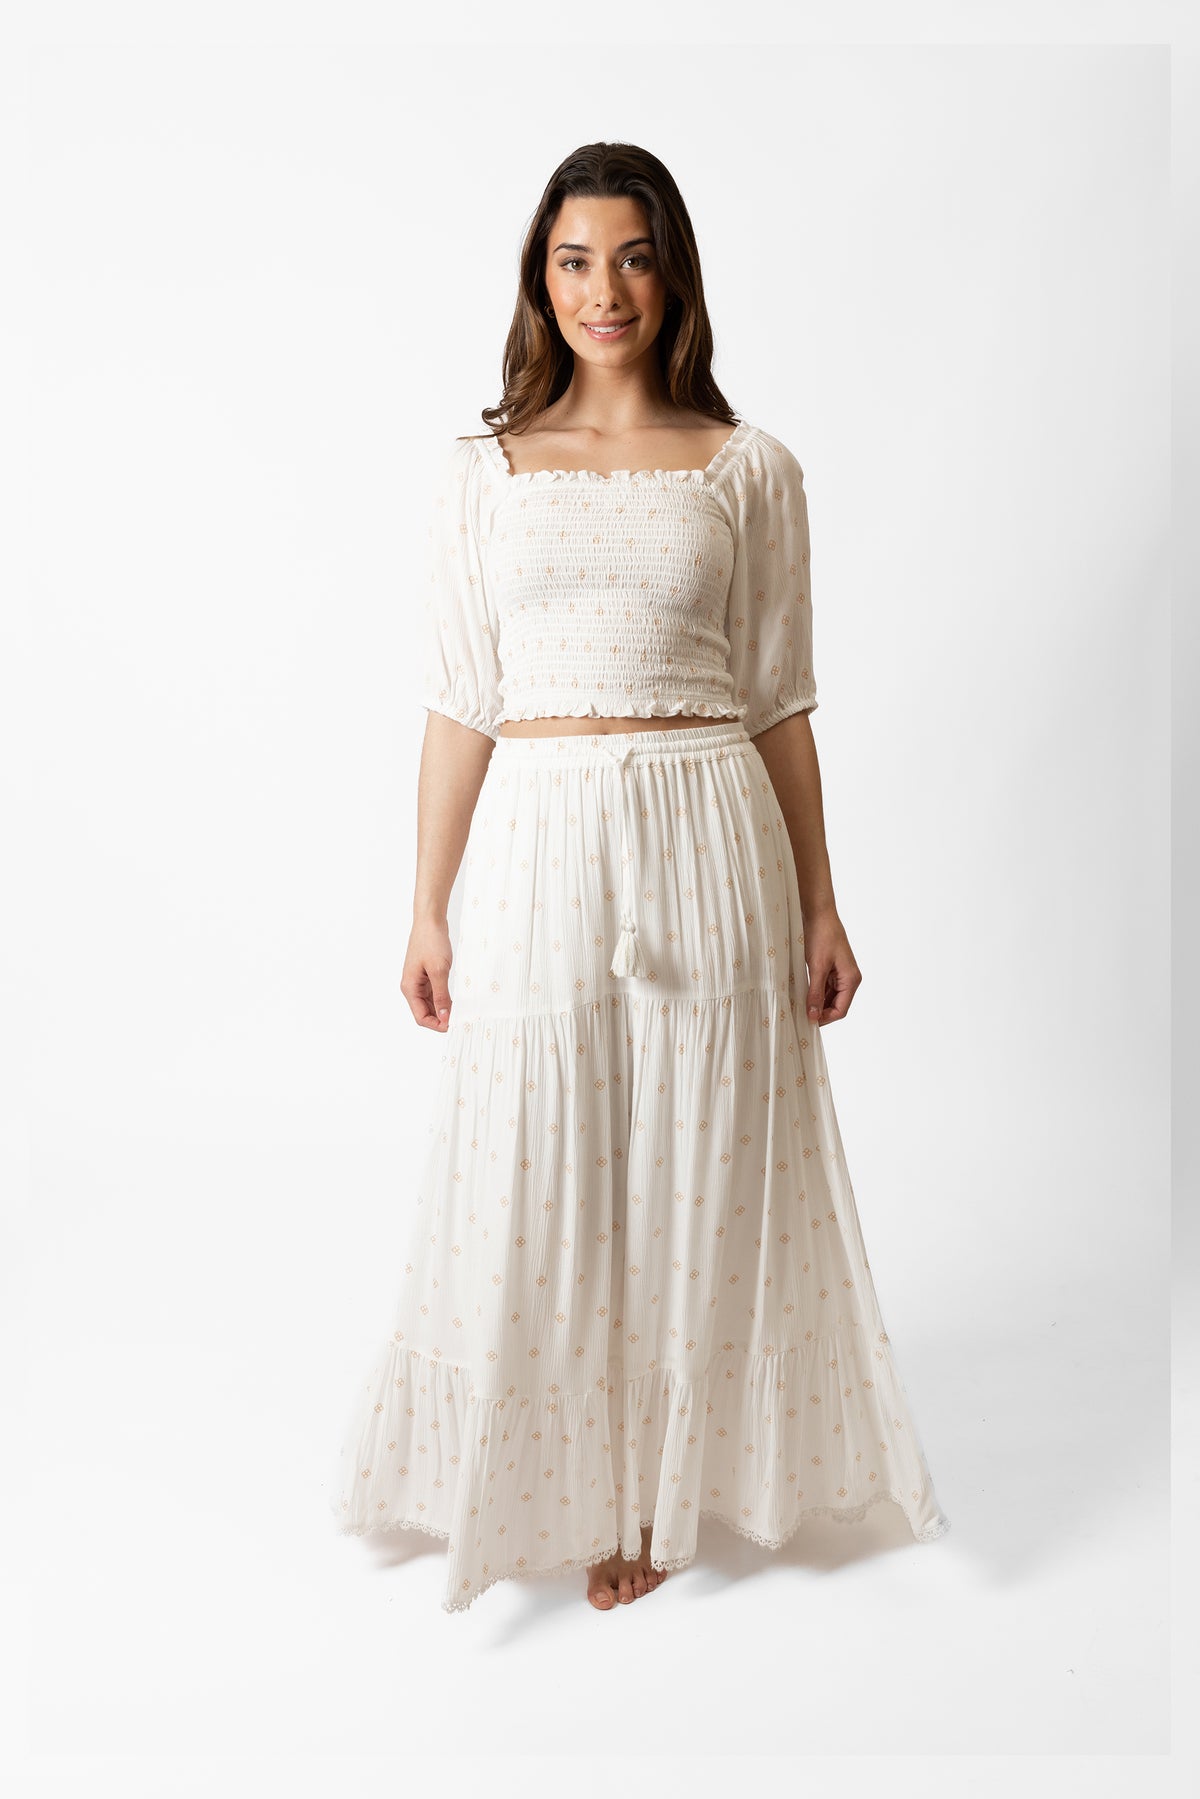 a front shot of a brunette hair woman wearing white with dot print matching crop top and maxi skirt smiling